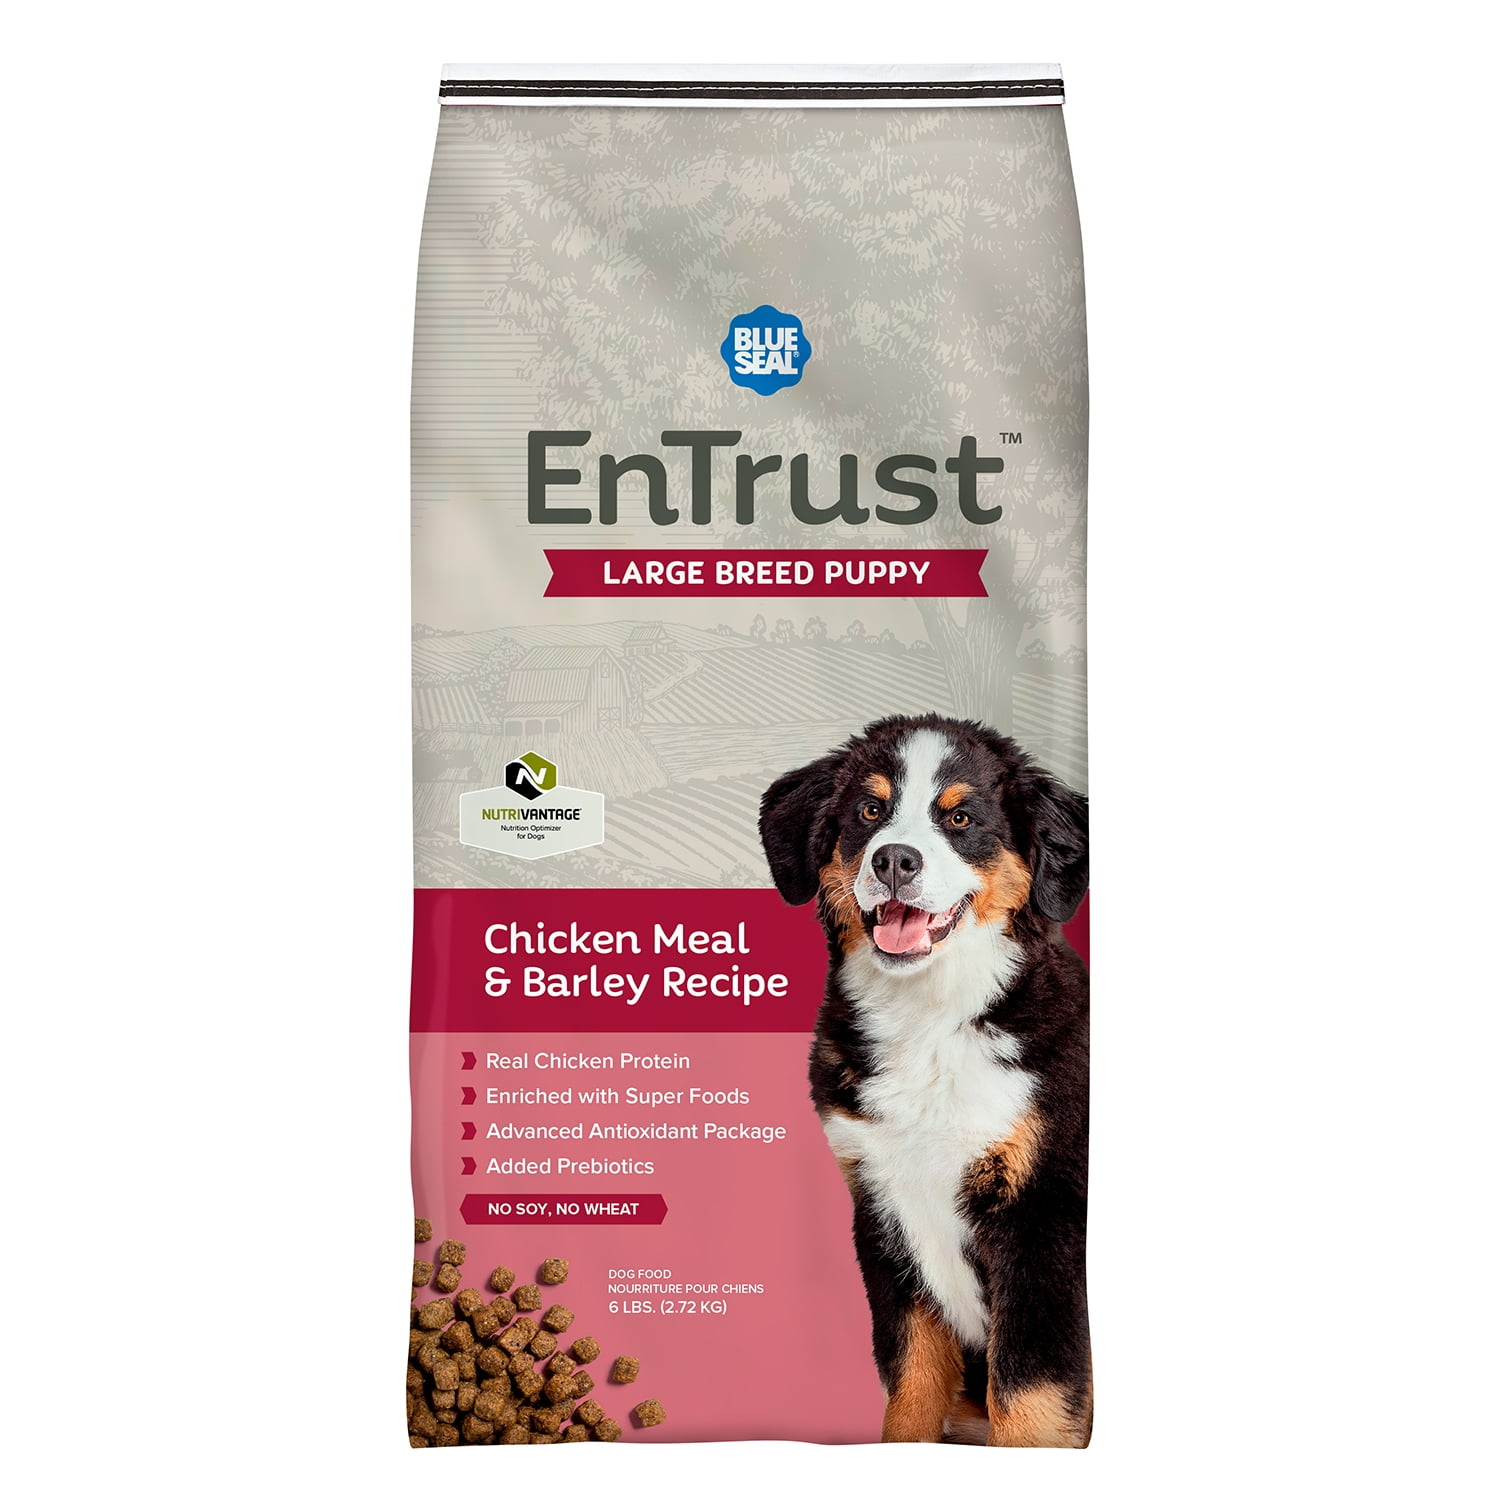 Where to Buy Entrust Dog Food? 2